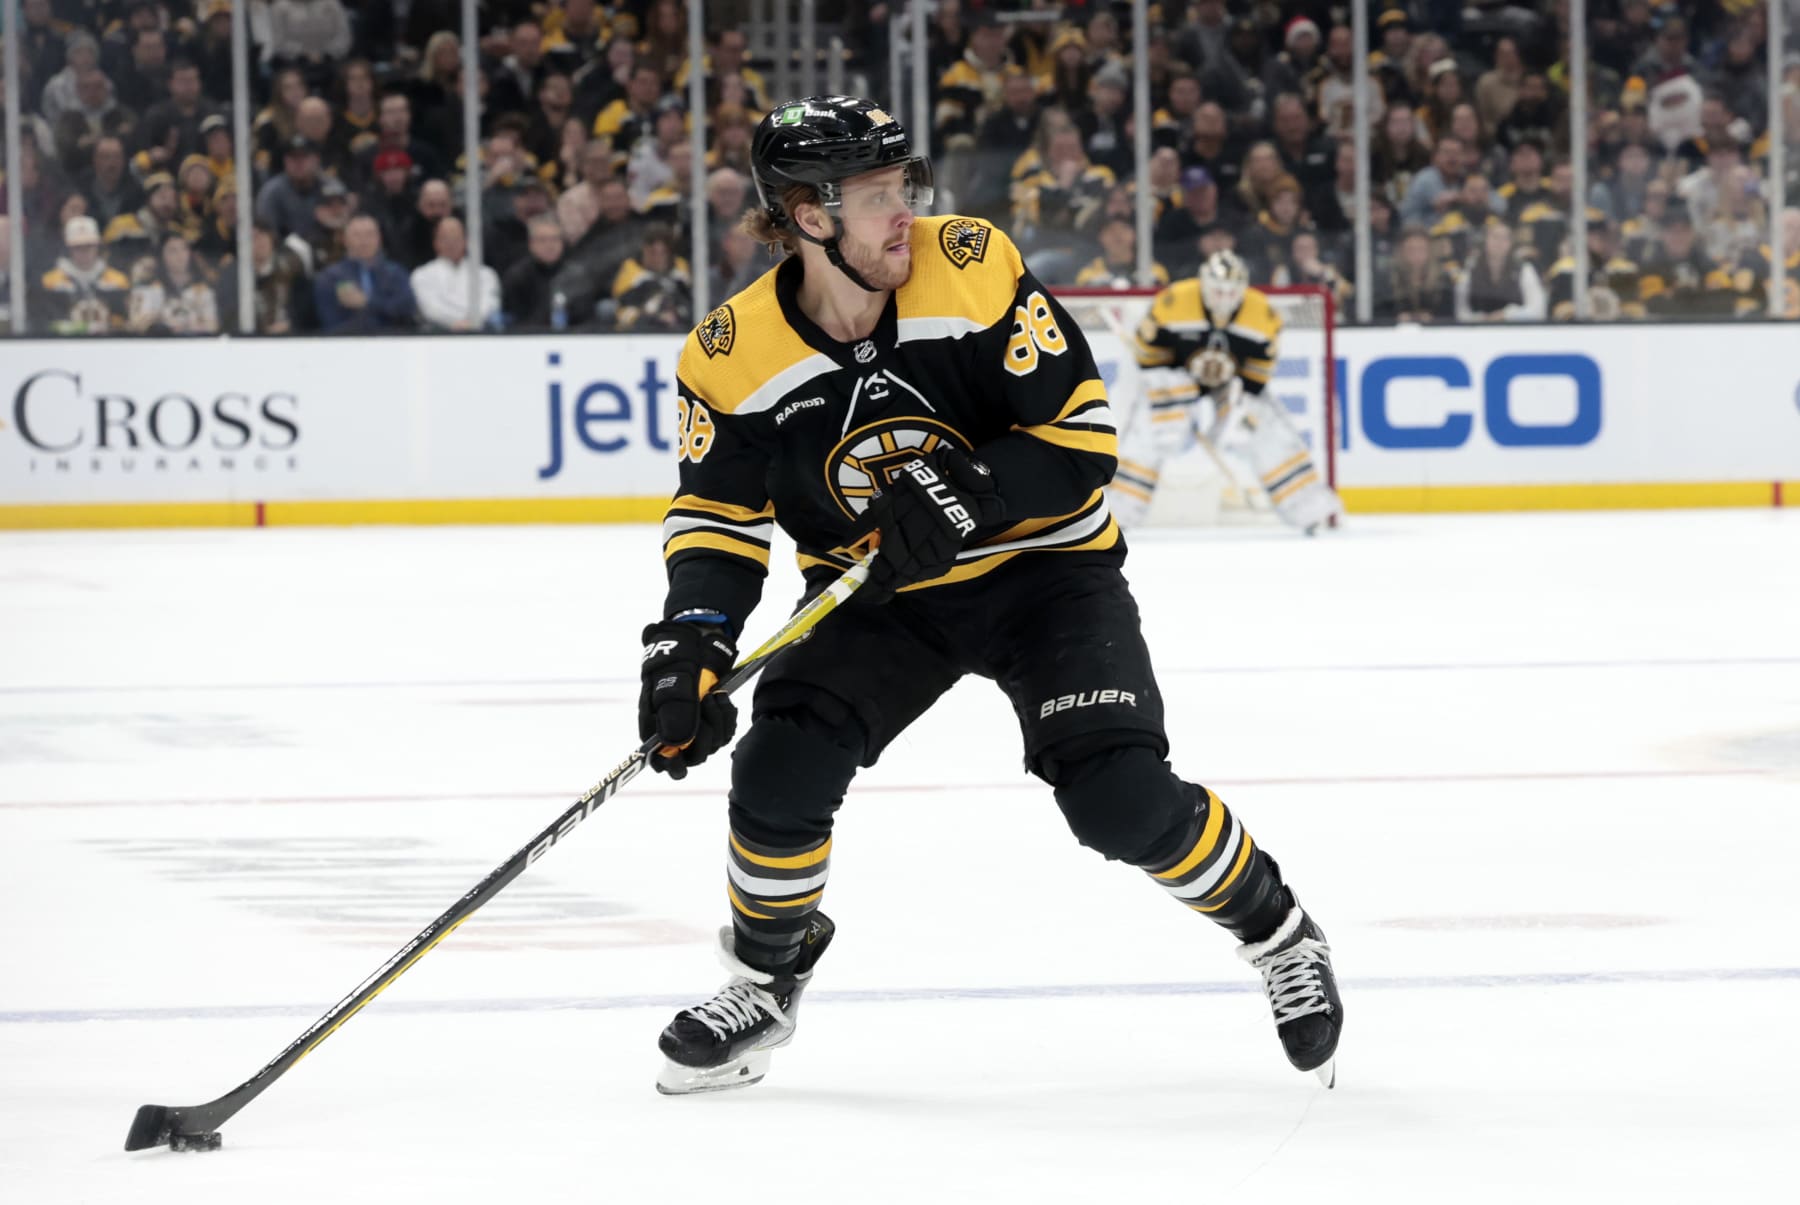 NHL free agency 2023: Best players still available this offseason